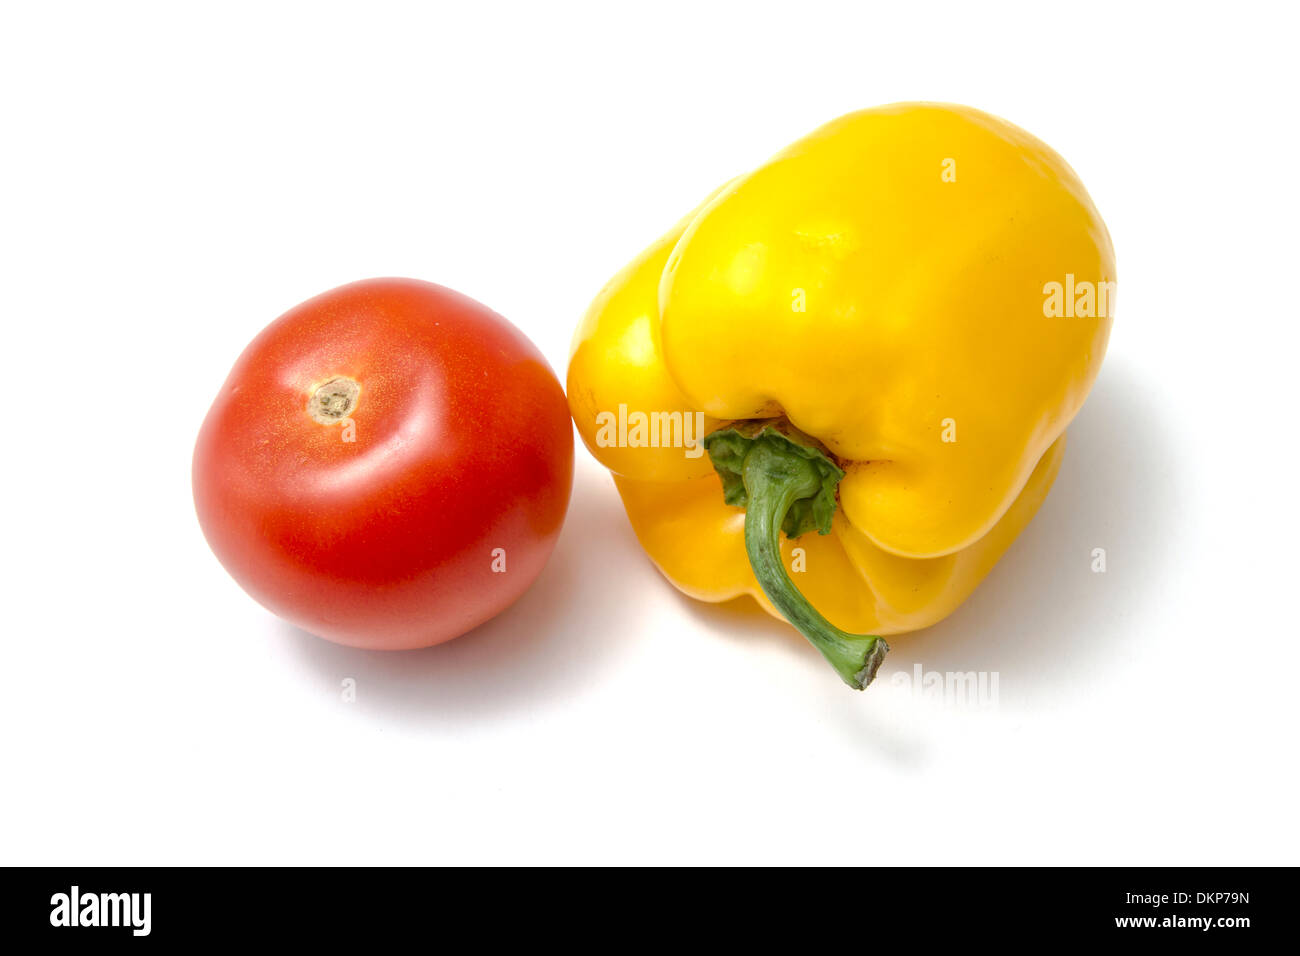 Red tomato and yellow pepper closeup on white background Stock Photo